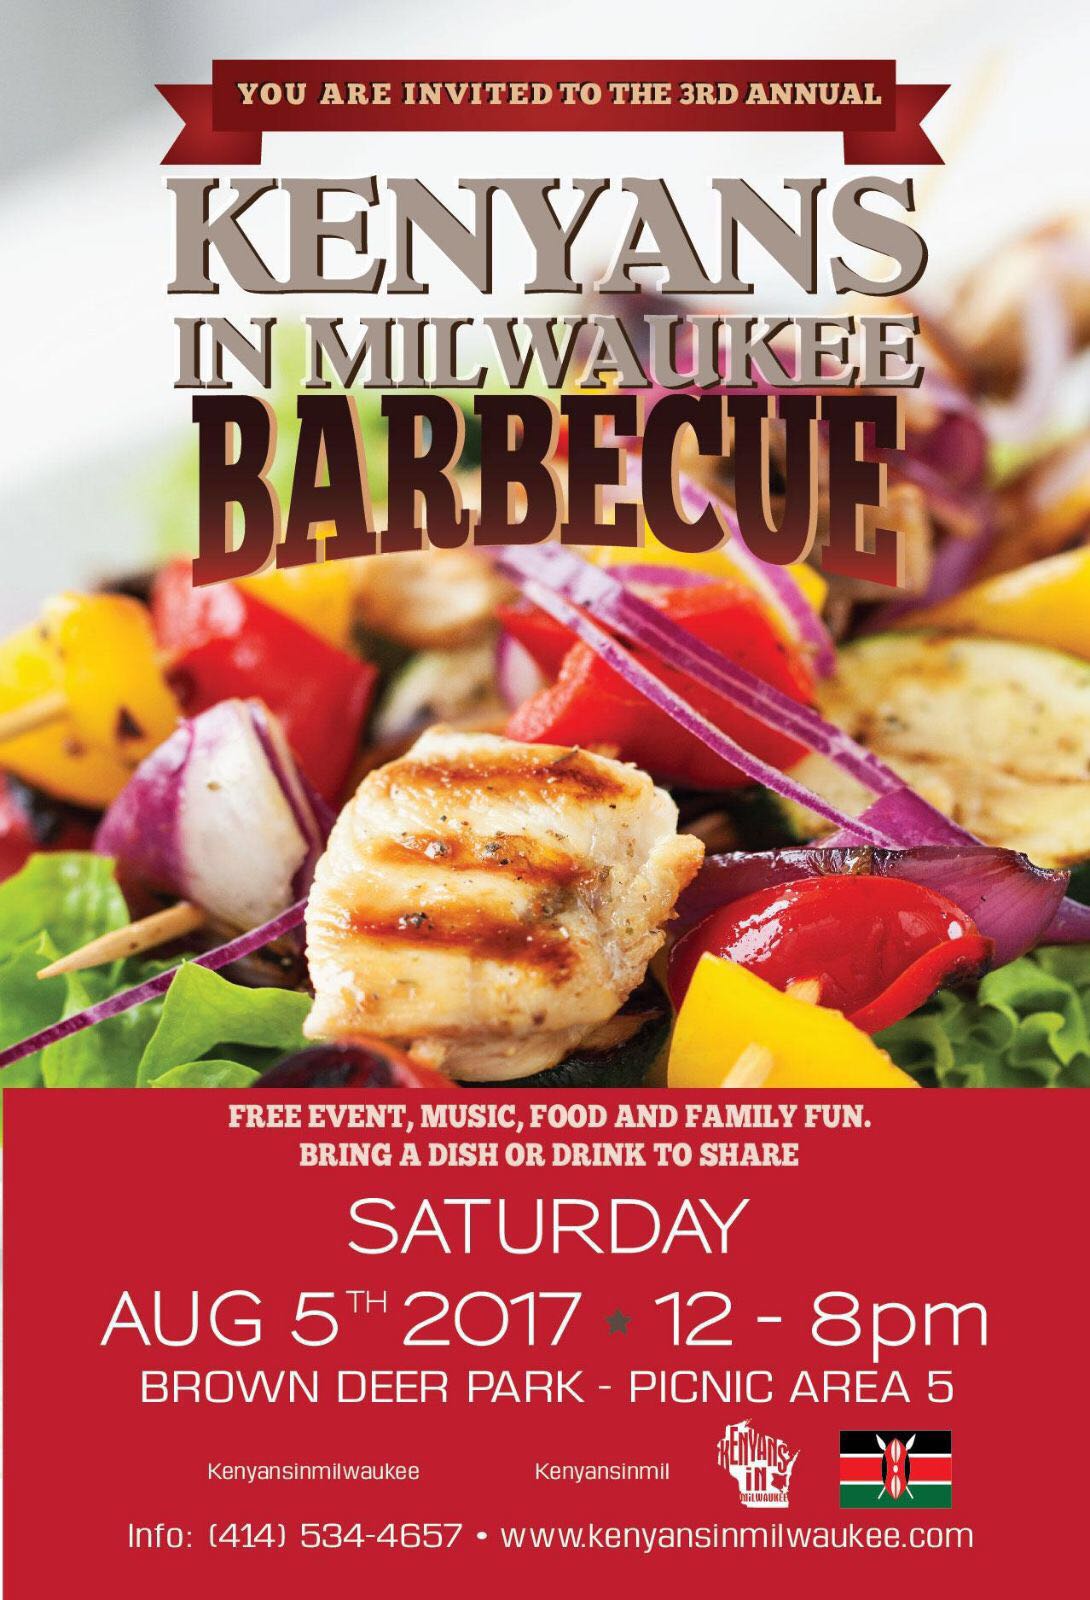 KENYANS IN MILWAUKEE BARBECUE – August 5th, 2017